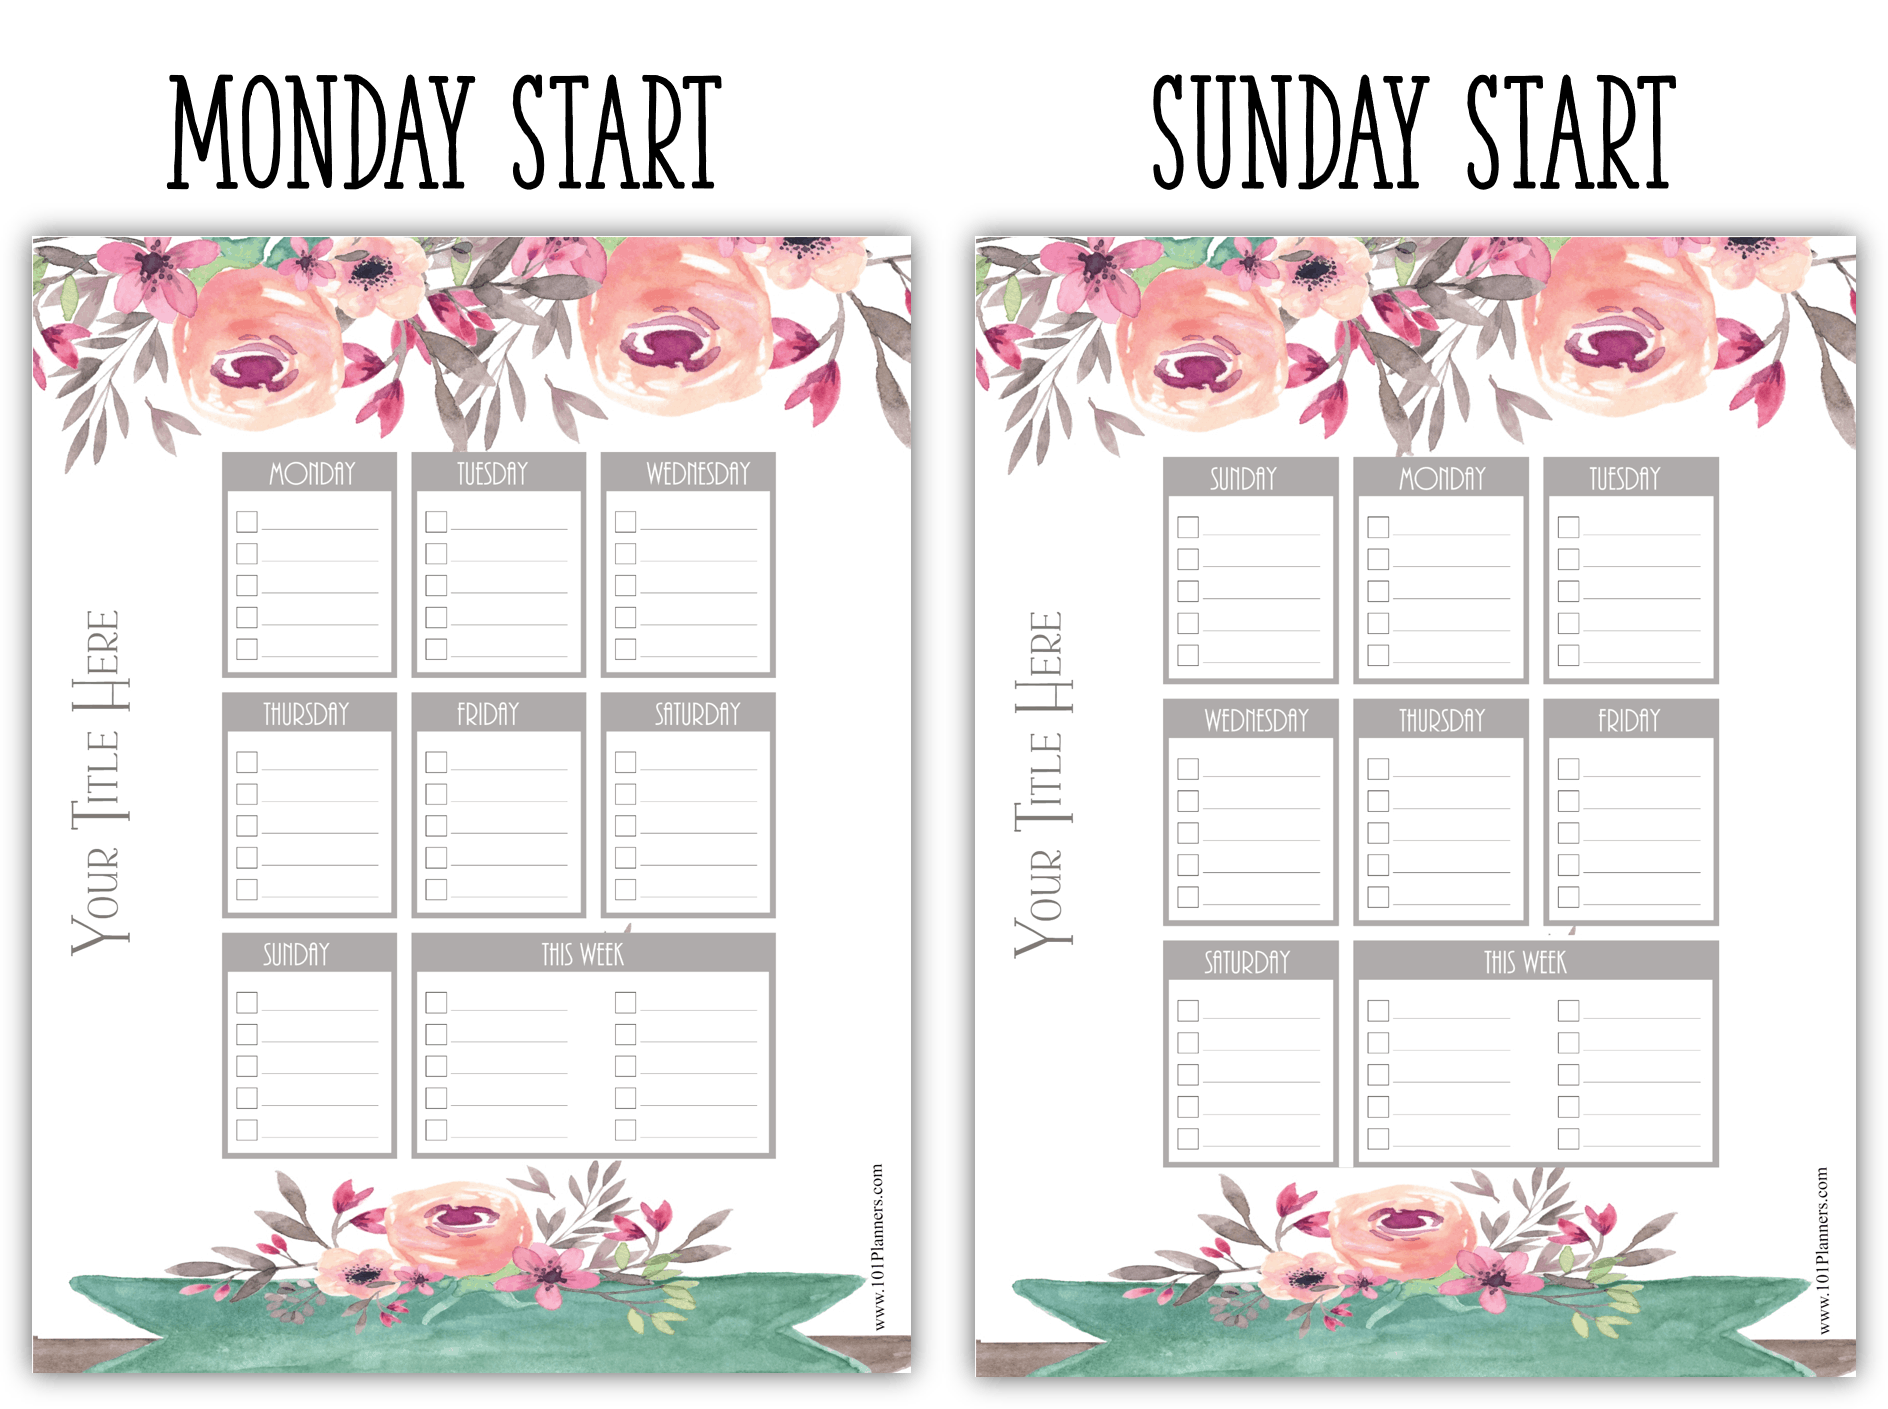 free-8-sample-weekly-to-do-list-templates-in-pdf